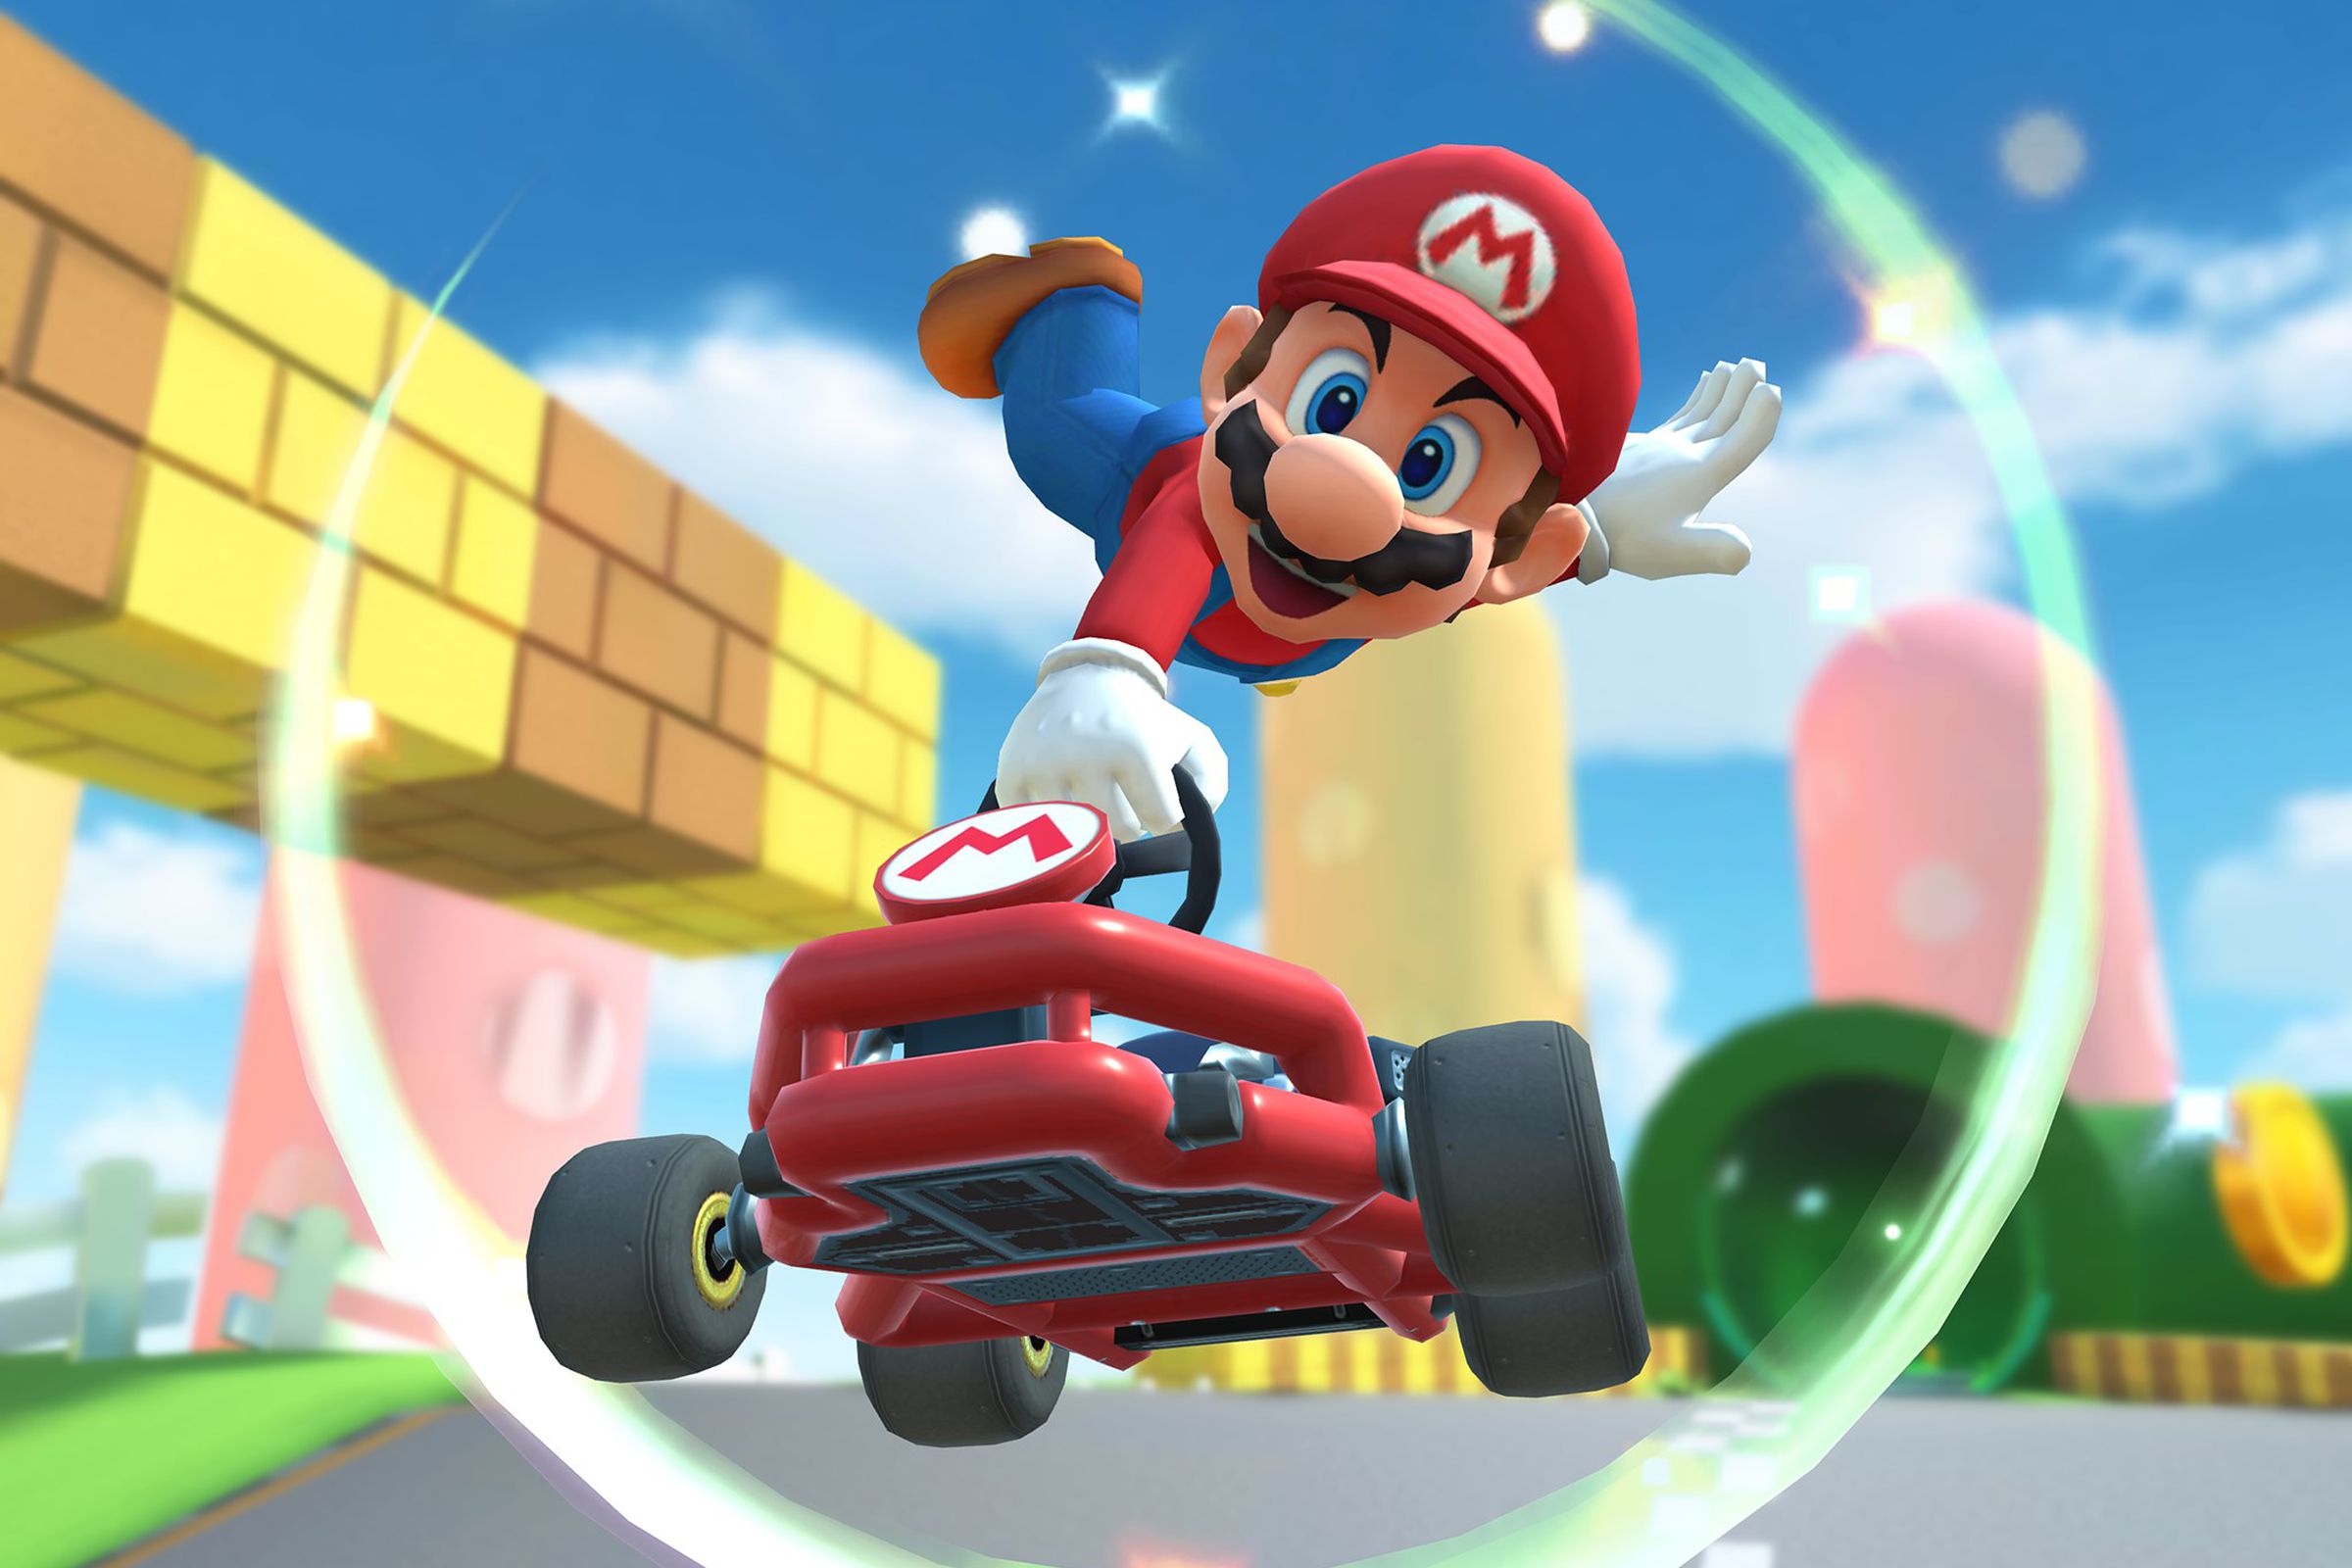 Mario in a car while racing in the game Mario Kart Tour.